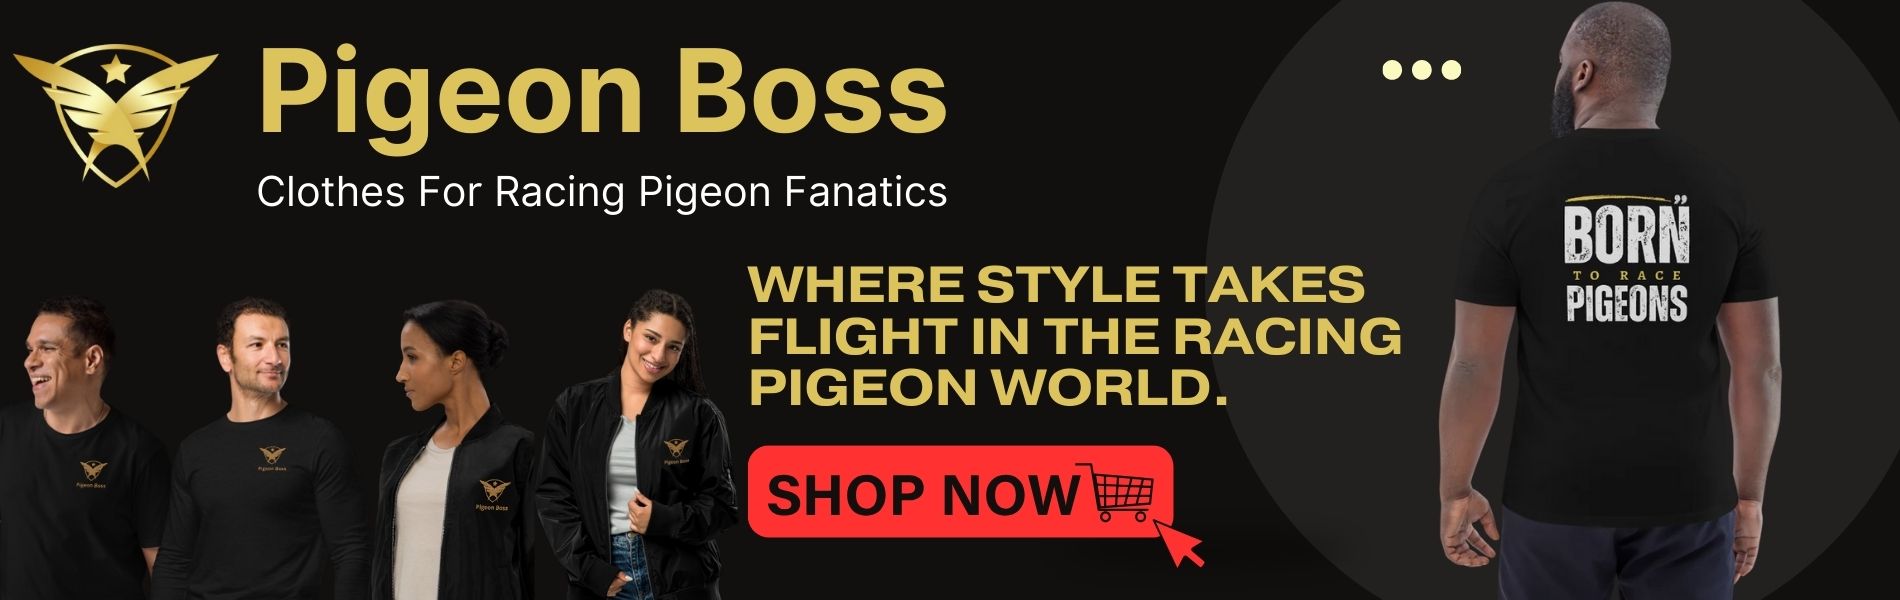 PIGEON BOSS: WHERE STYLE TAKES FLIGHT IN THE RACING PIGEON WORLD.